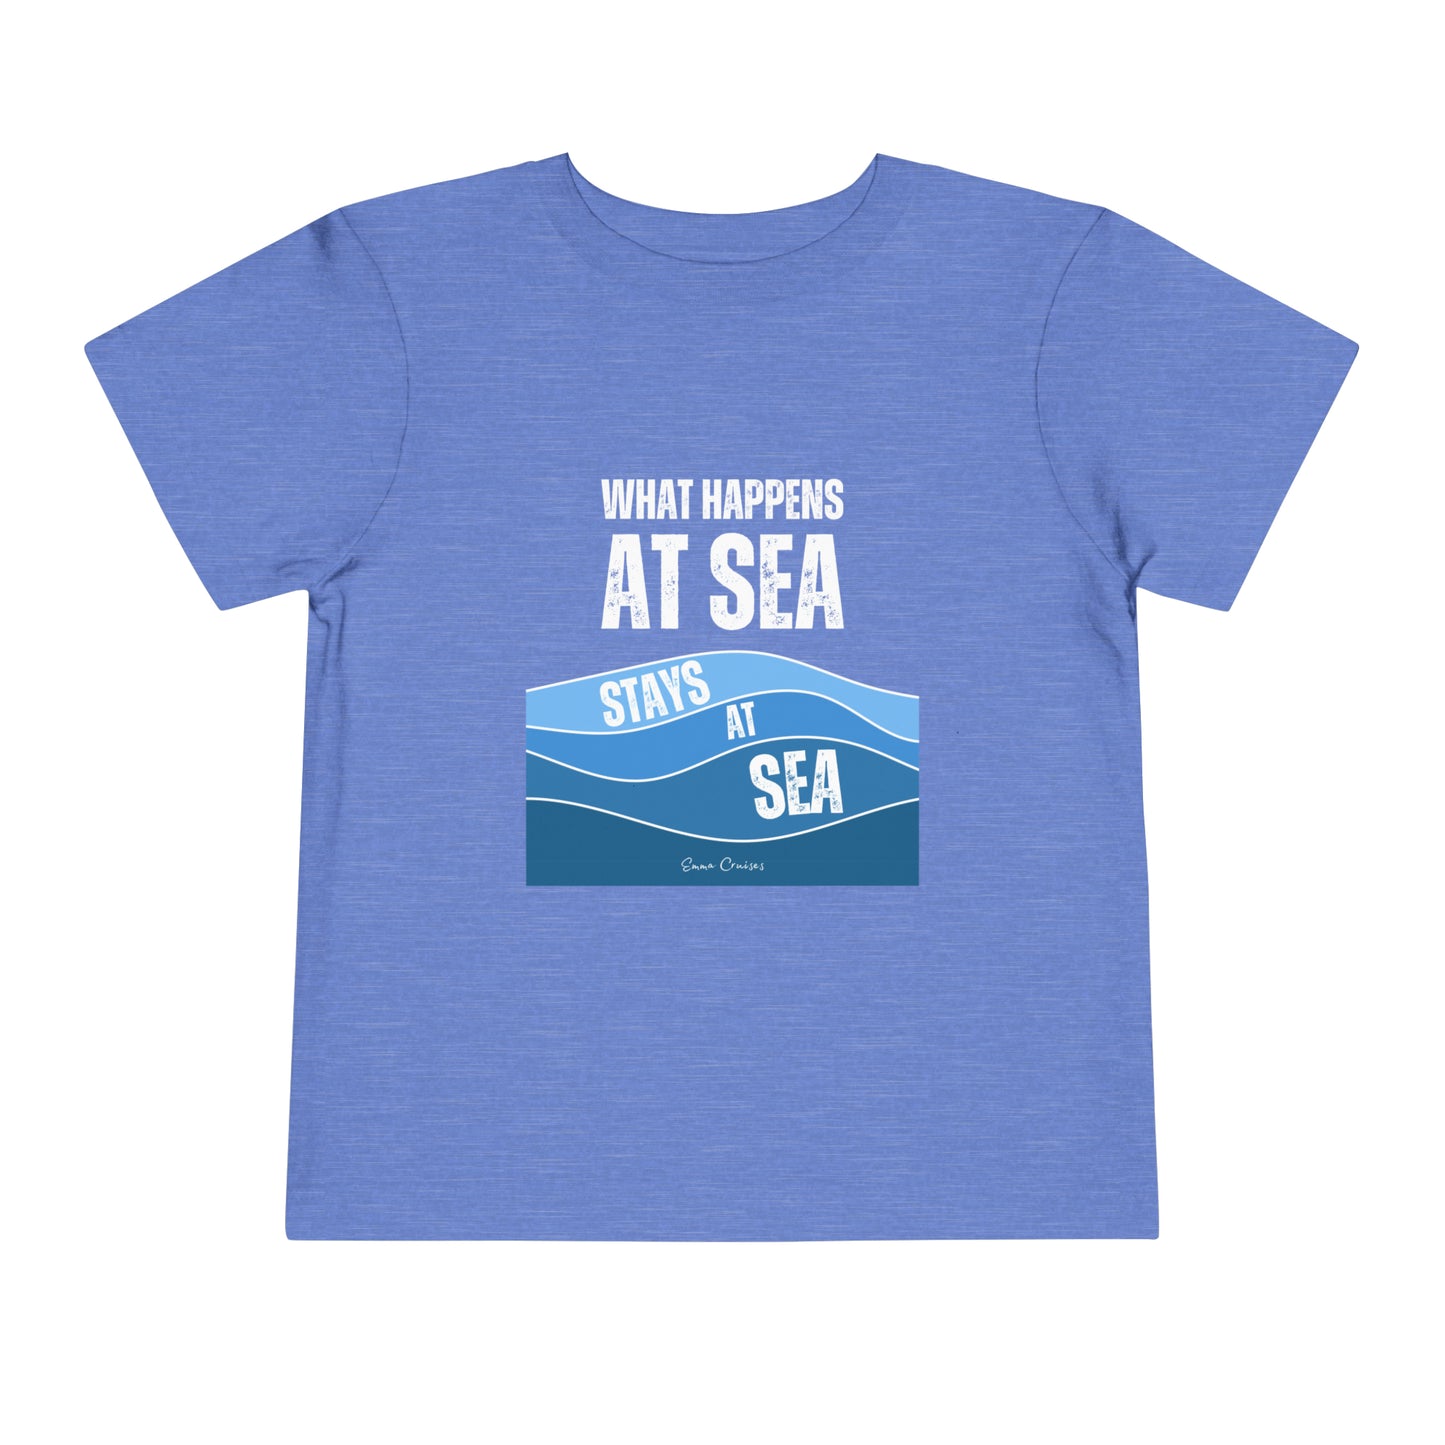 What Happens at Sea - Toddler UNISEX T-Shirt